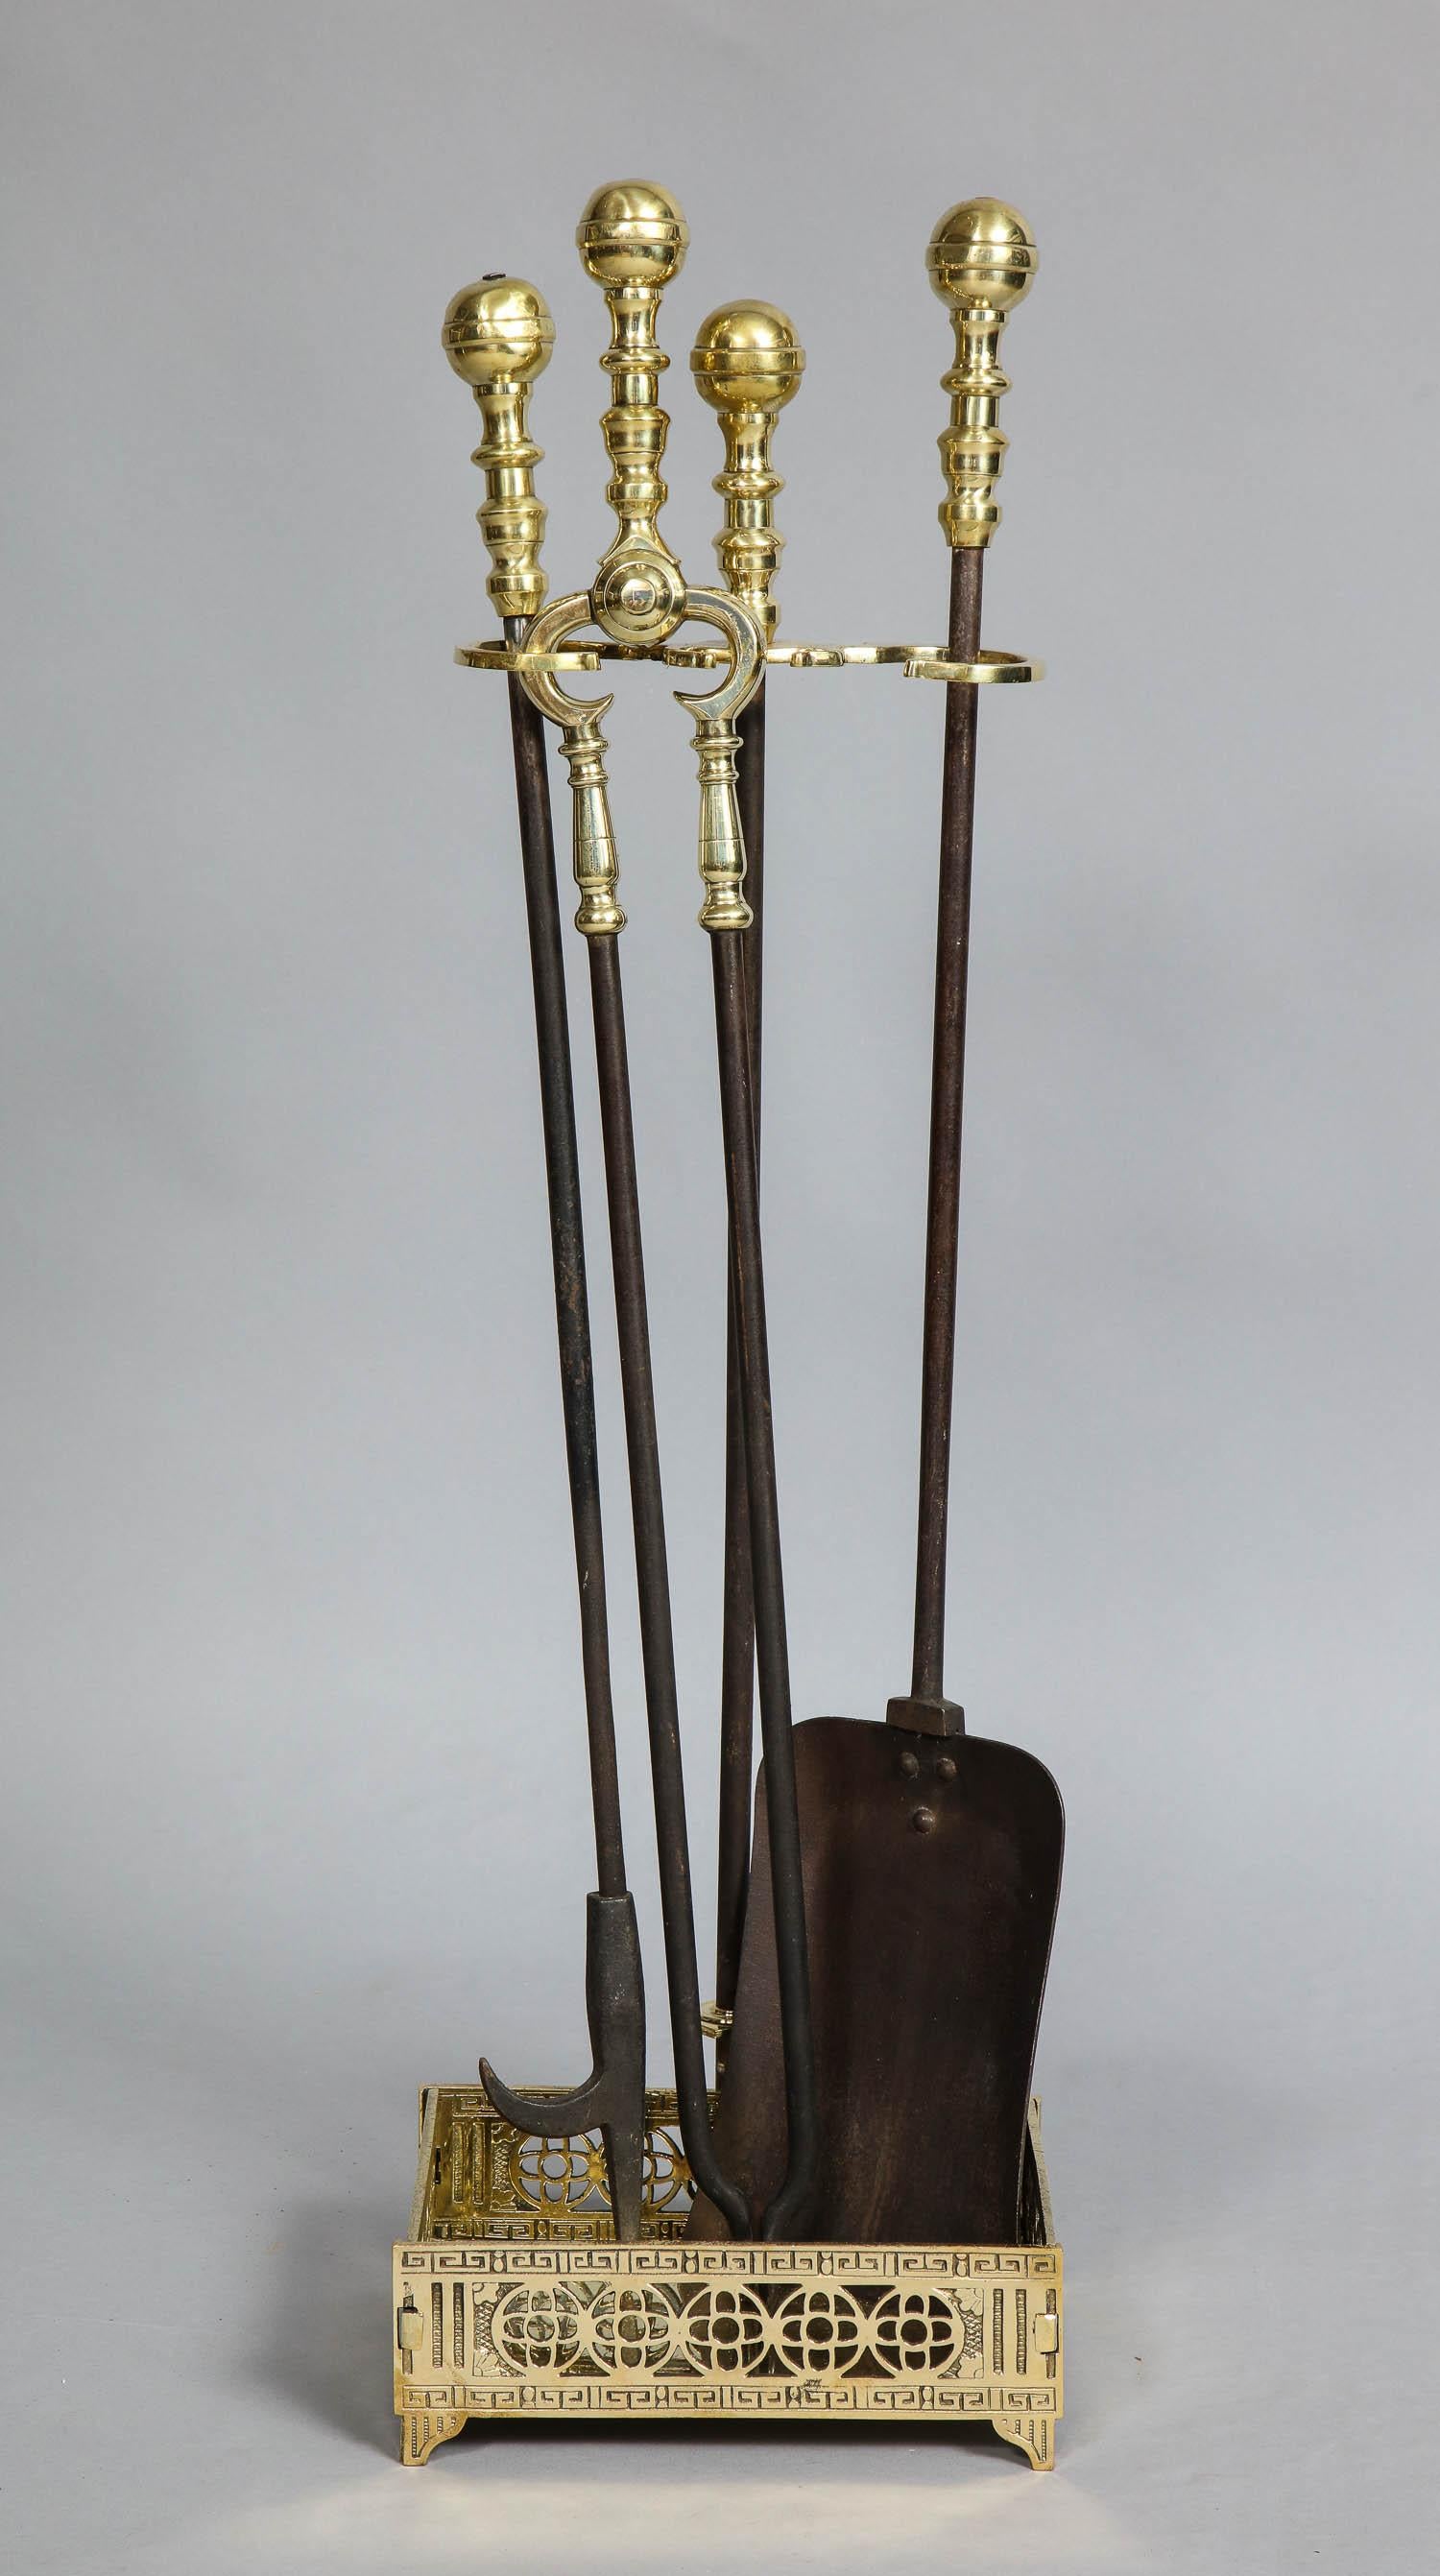 Good set of 19th century brass and blackened wrought iron fire tools and matching stand having ball finials and ring turned handles, the square base with interesting pierced decoration.

Measures: Stand: 9